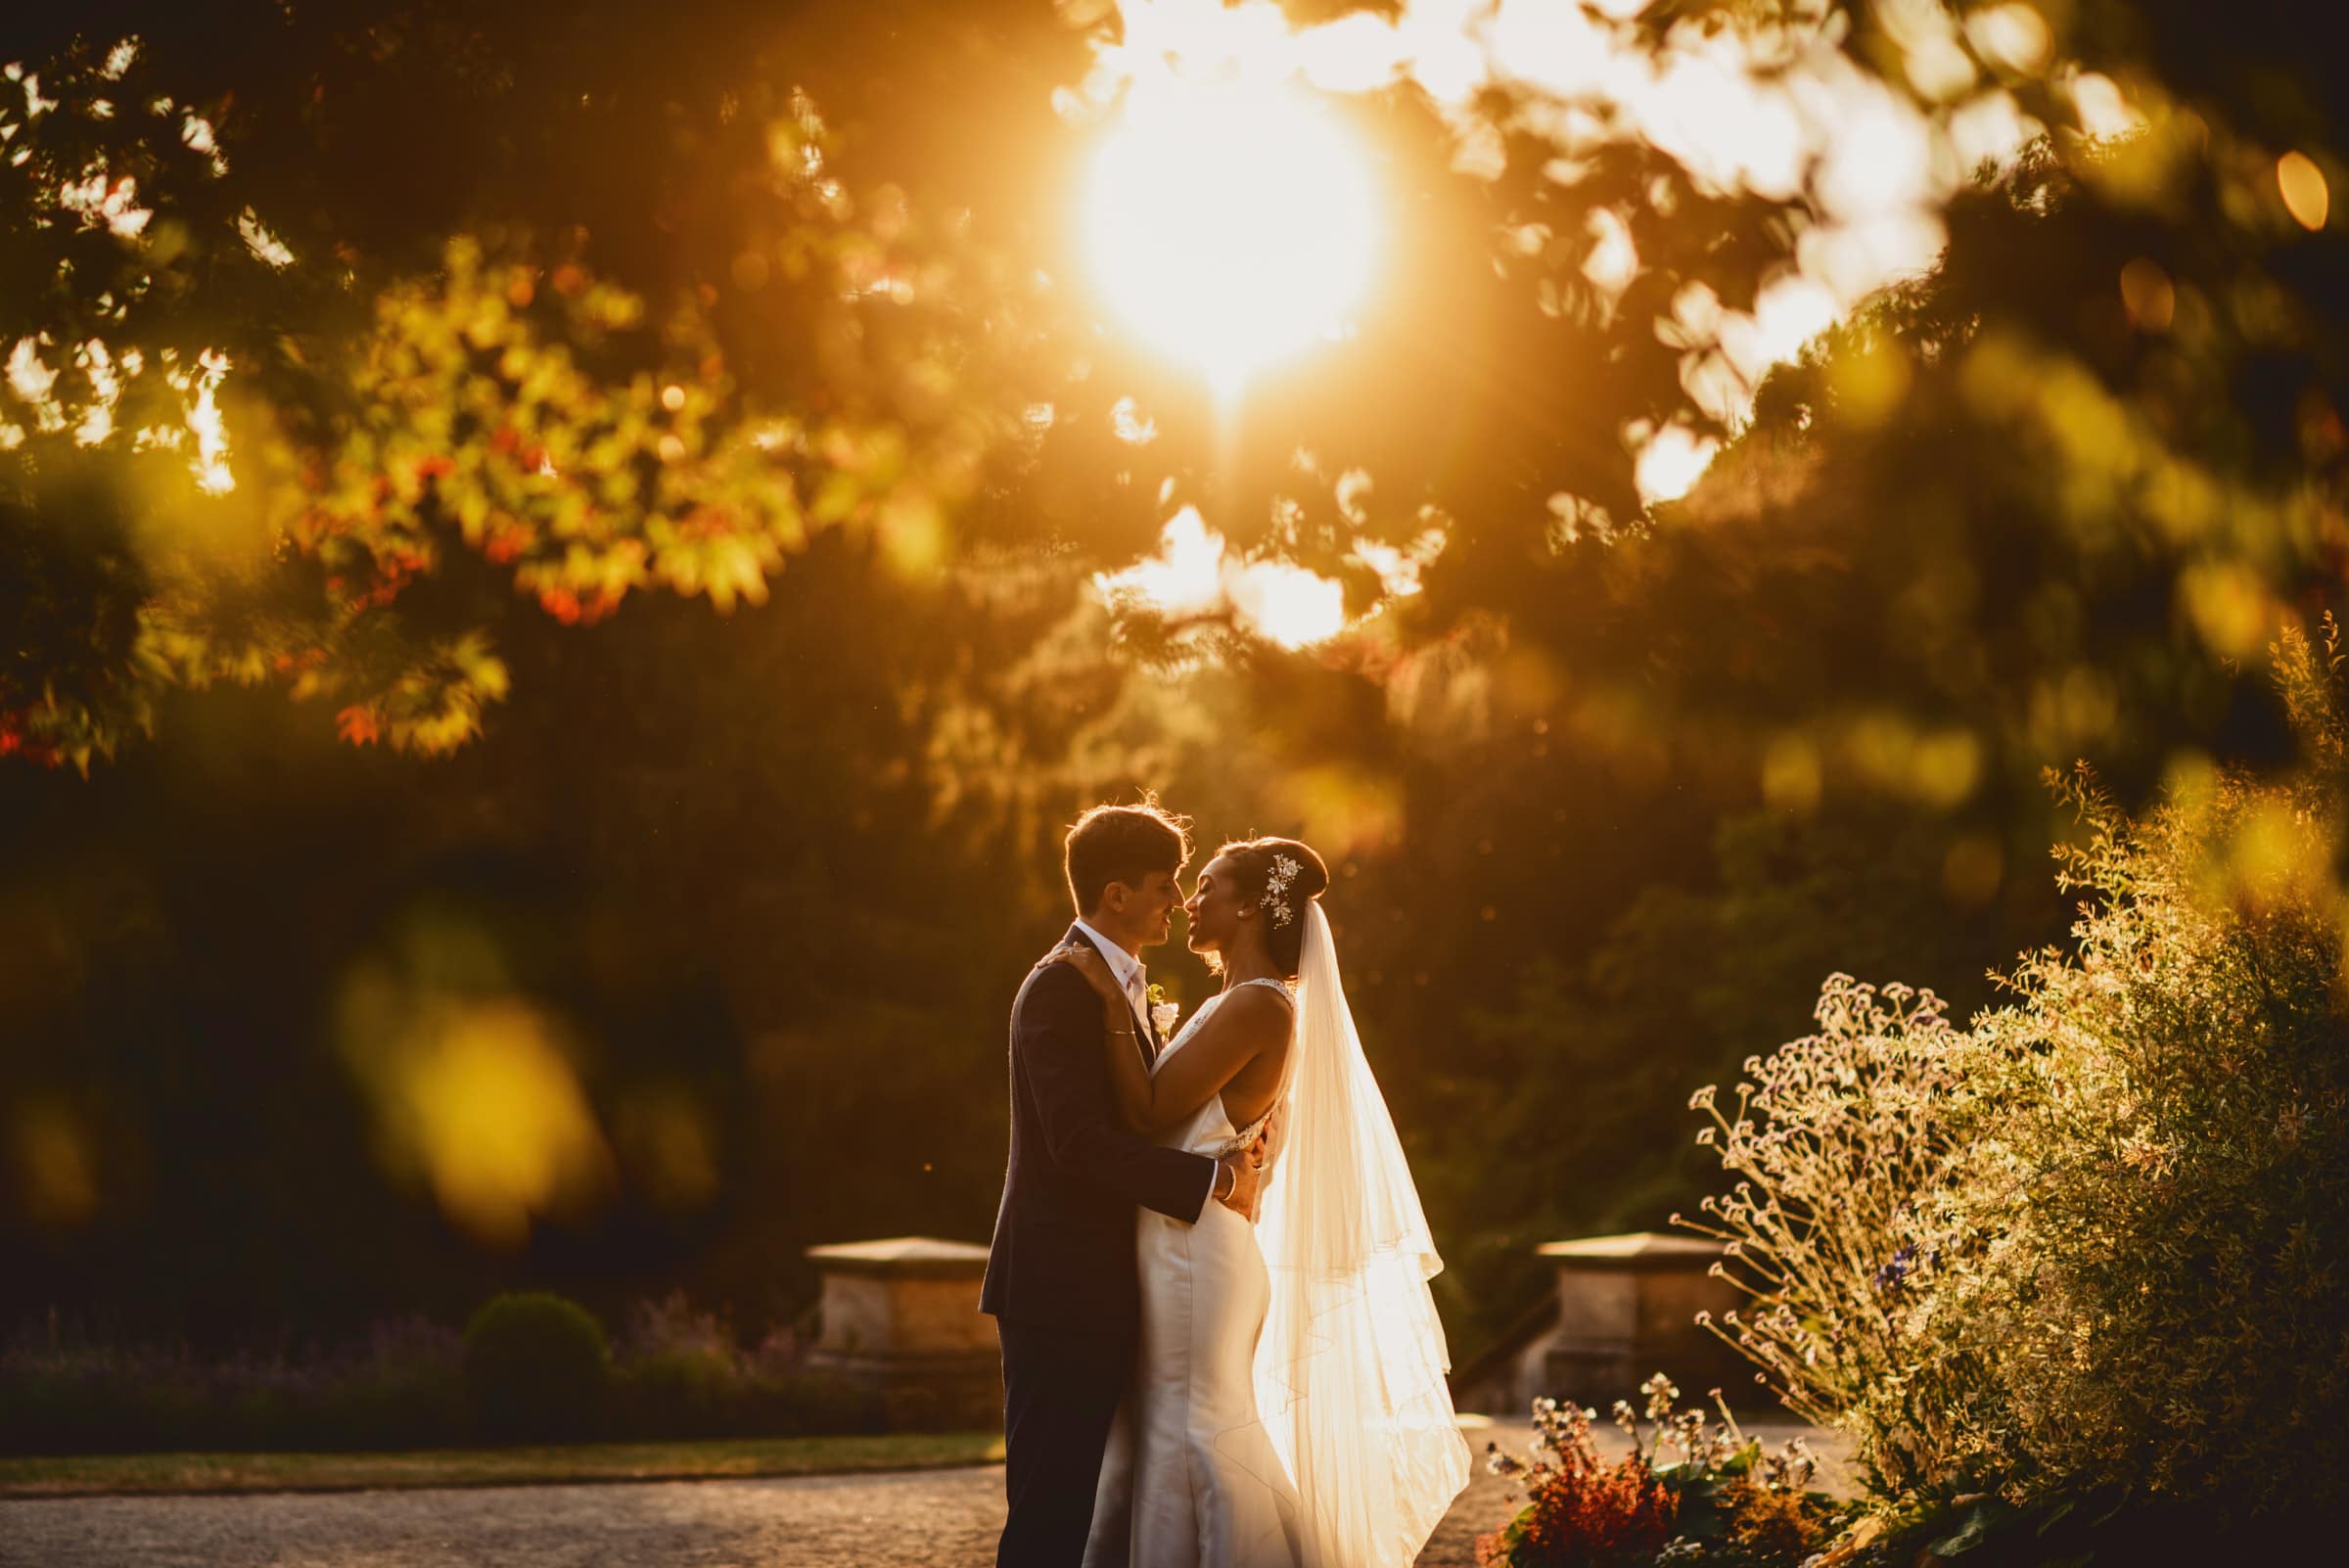 Bride and groom under tree with stunning sunset